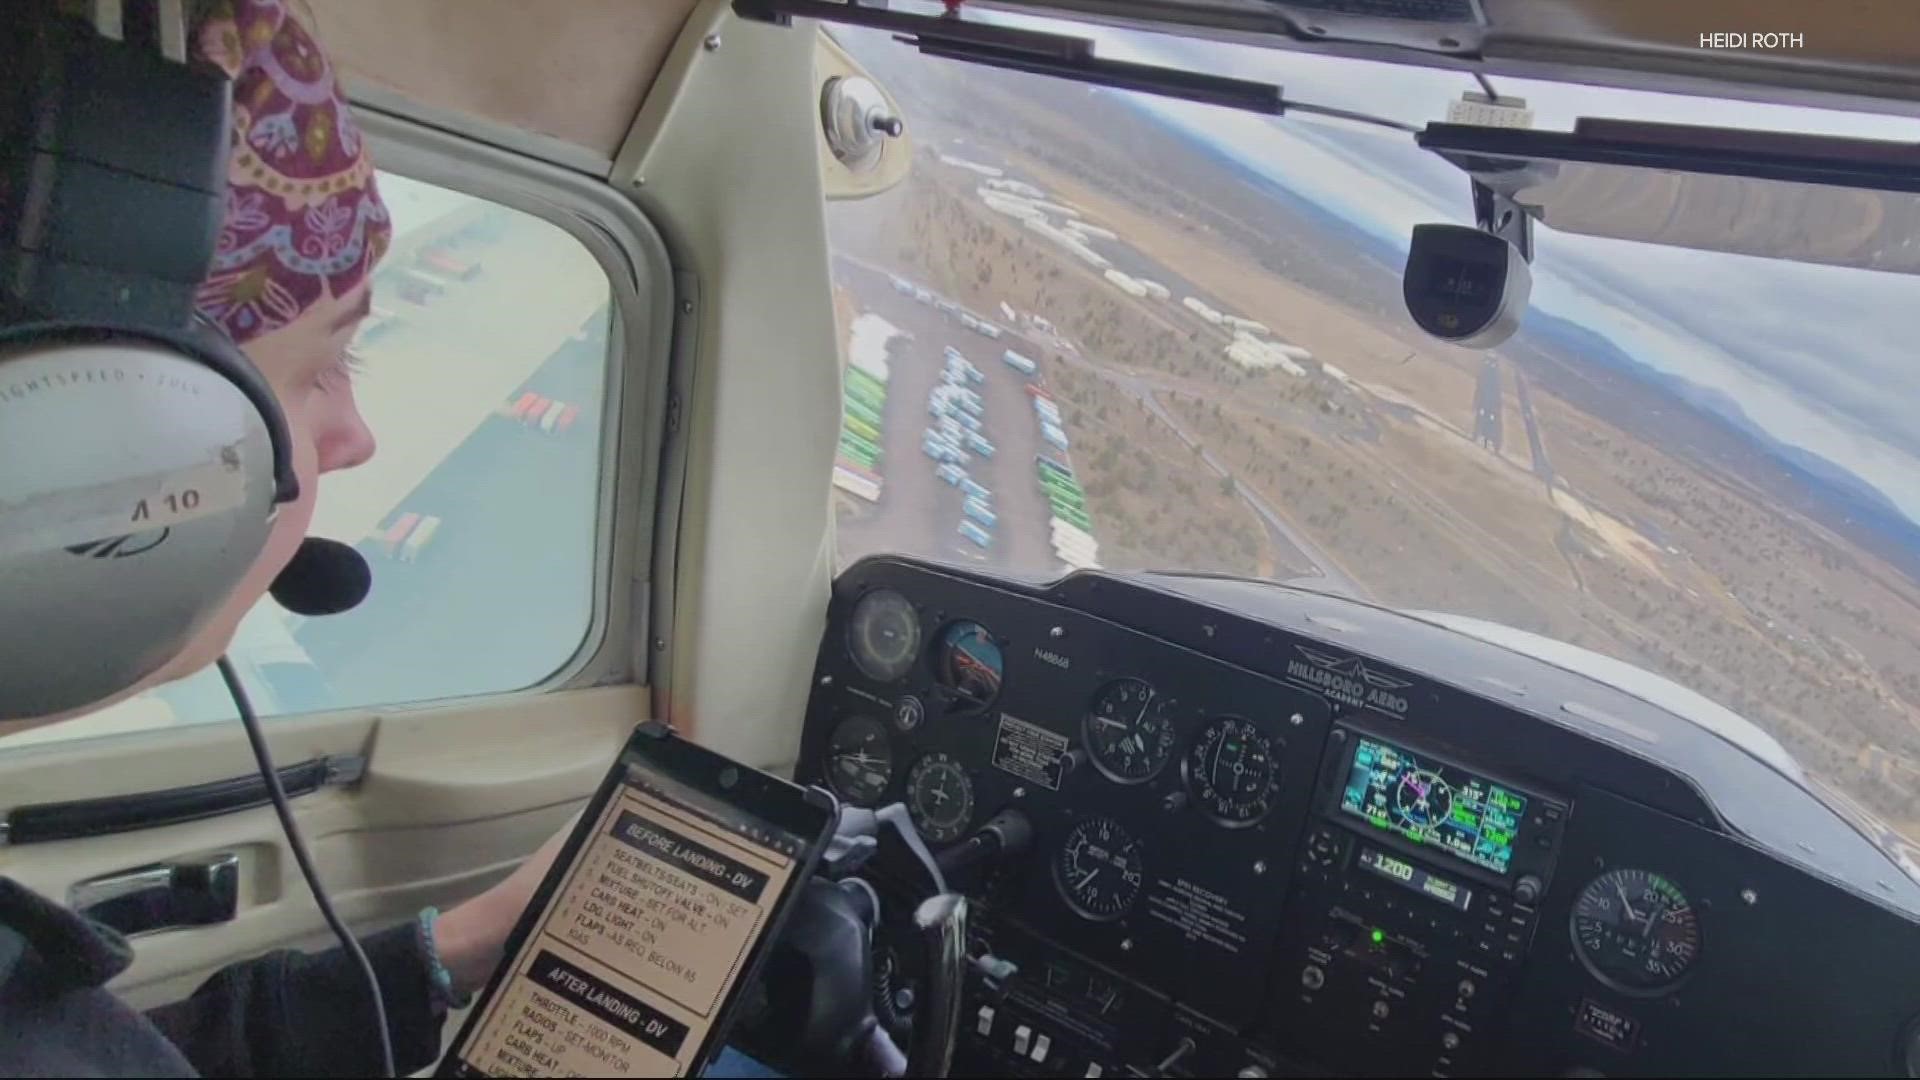 To combat a worldwide shortage of pilots, Alaska is offering to cover $25,000 worth of training costs. It will also arrange low-interest loans to pay for the rest.